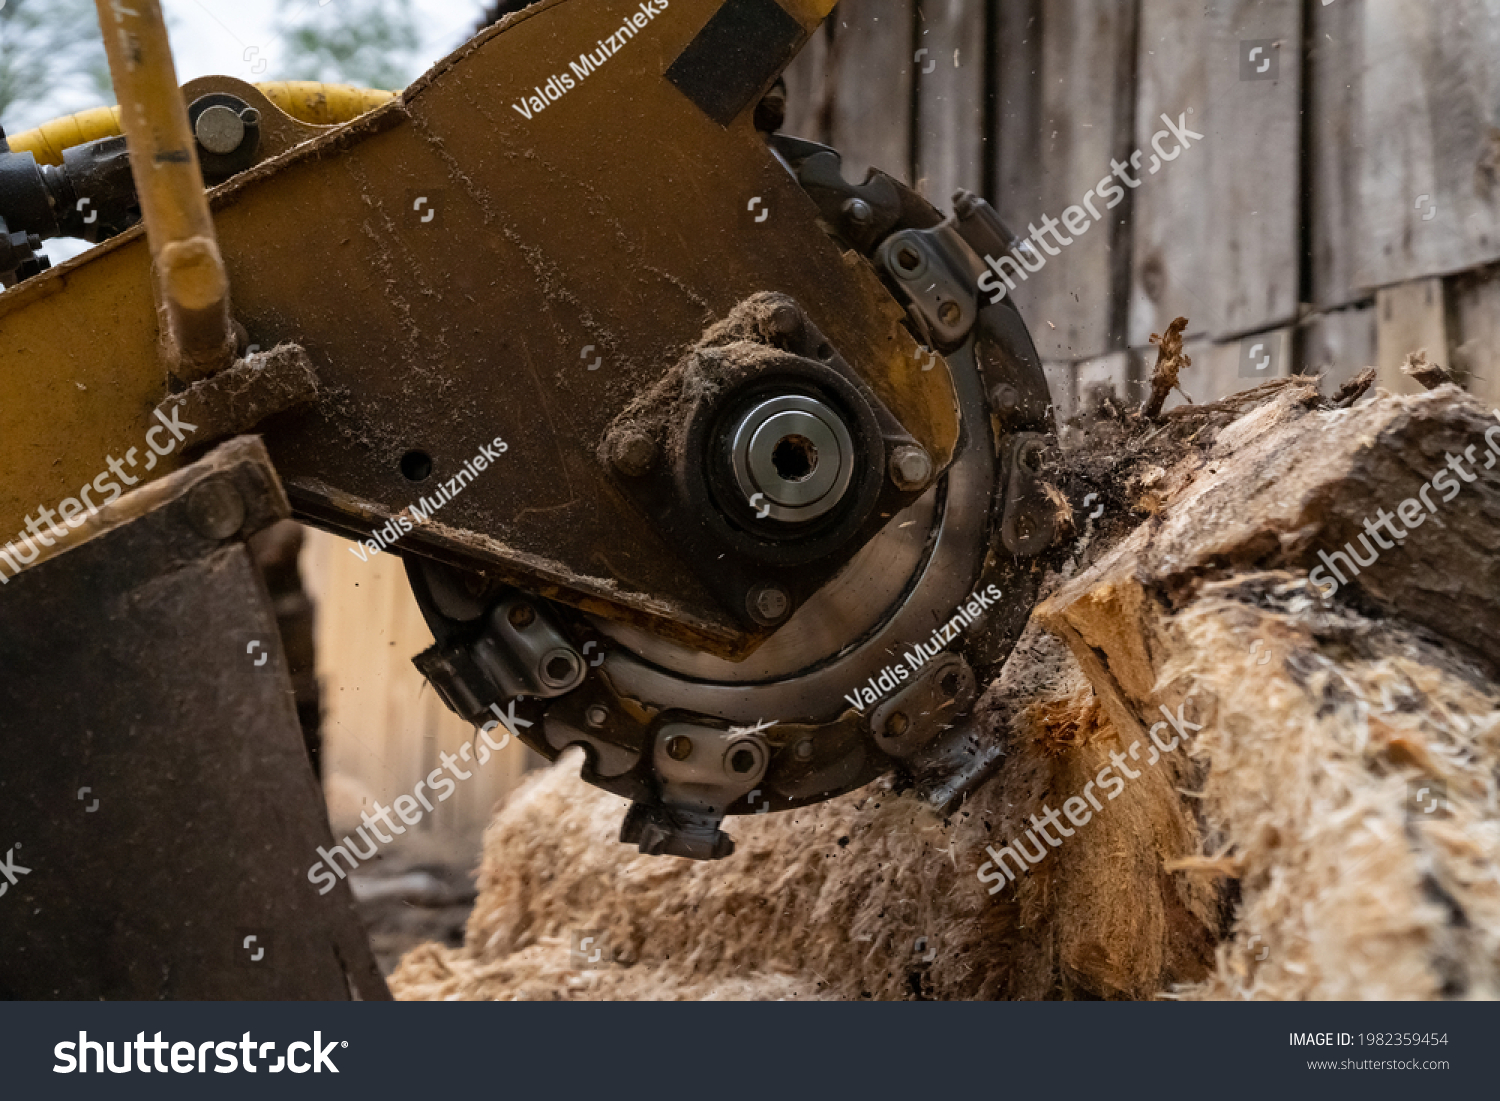 The process of removing a tree stump where the rotating head of the stump cutter grinds a freshly sawn stump.

The shredding disc is stiffened when you can see the blades splitting the stump
 #1982359454